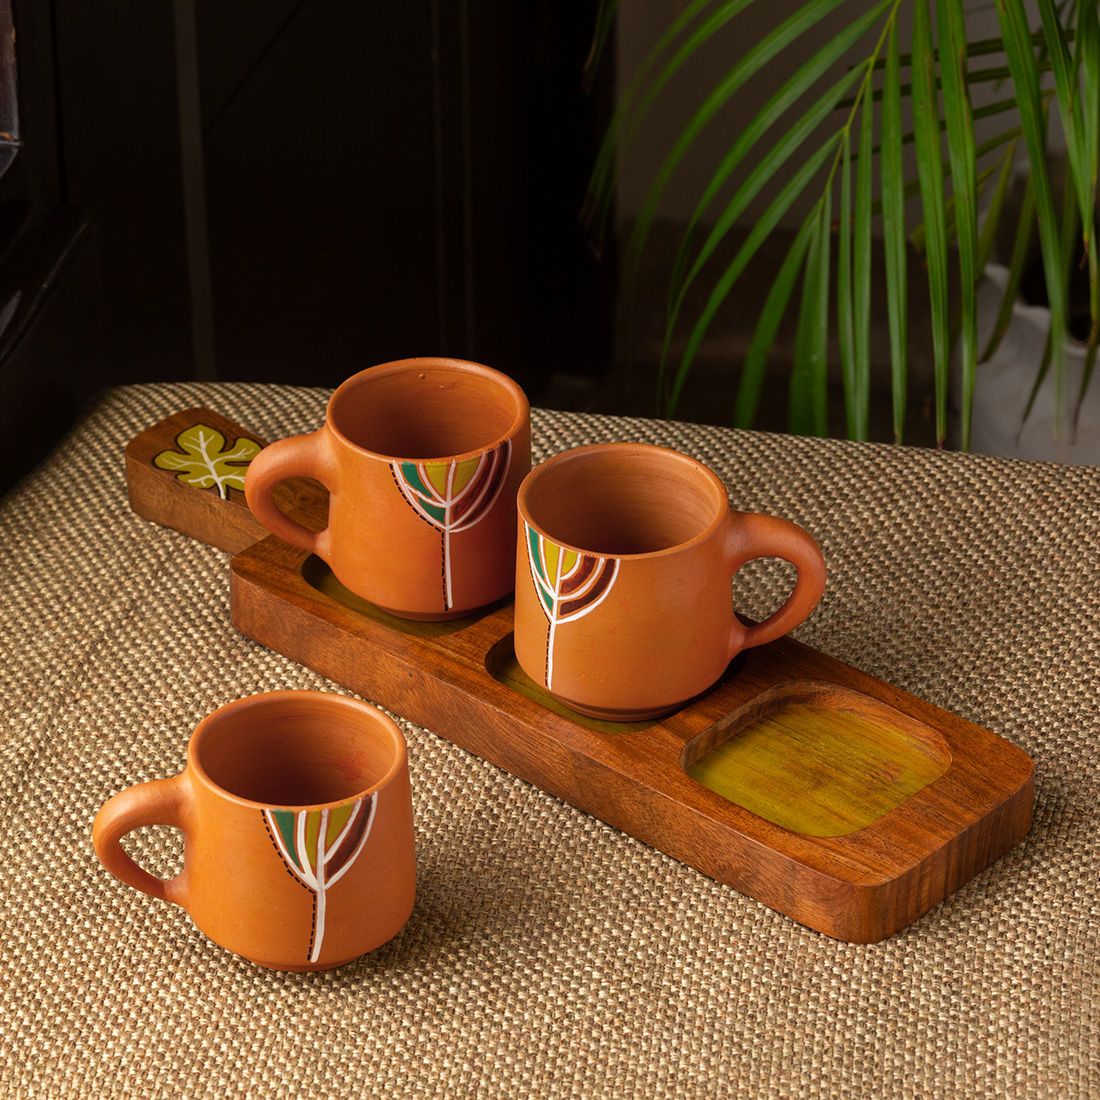 ExclusiveLane Shades of a Leaf' Terracotta Coffee & Tea Cups With Tray (Set of 3, 160 ml)